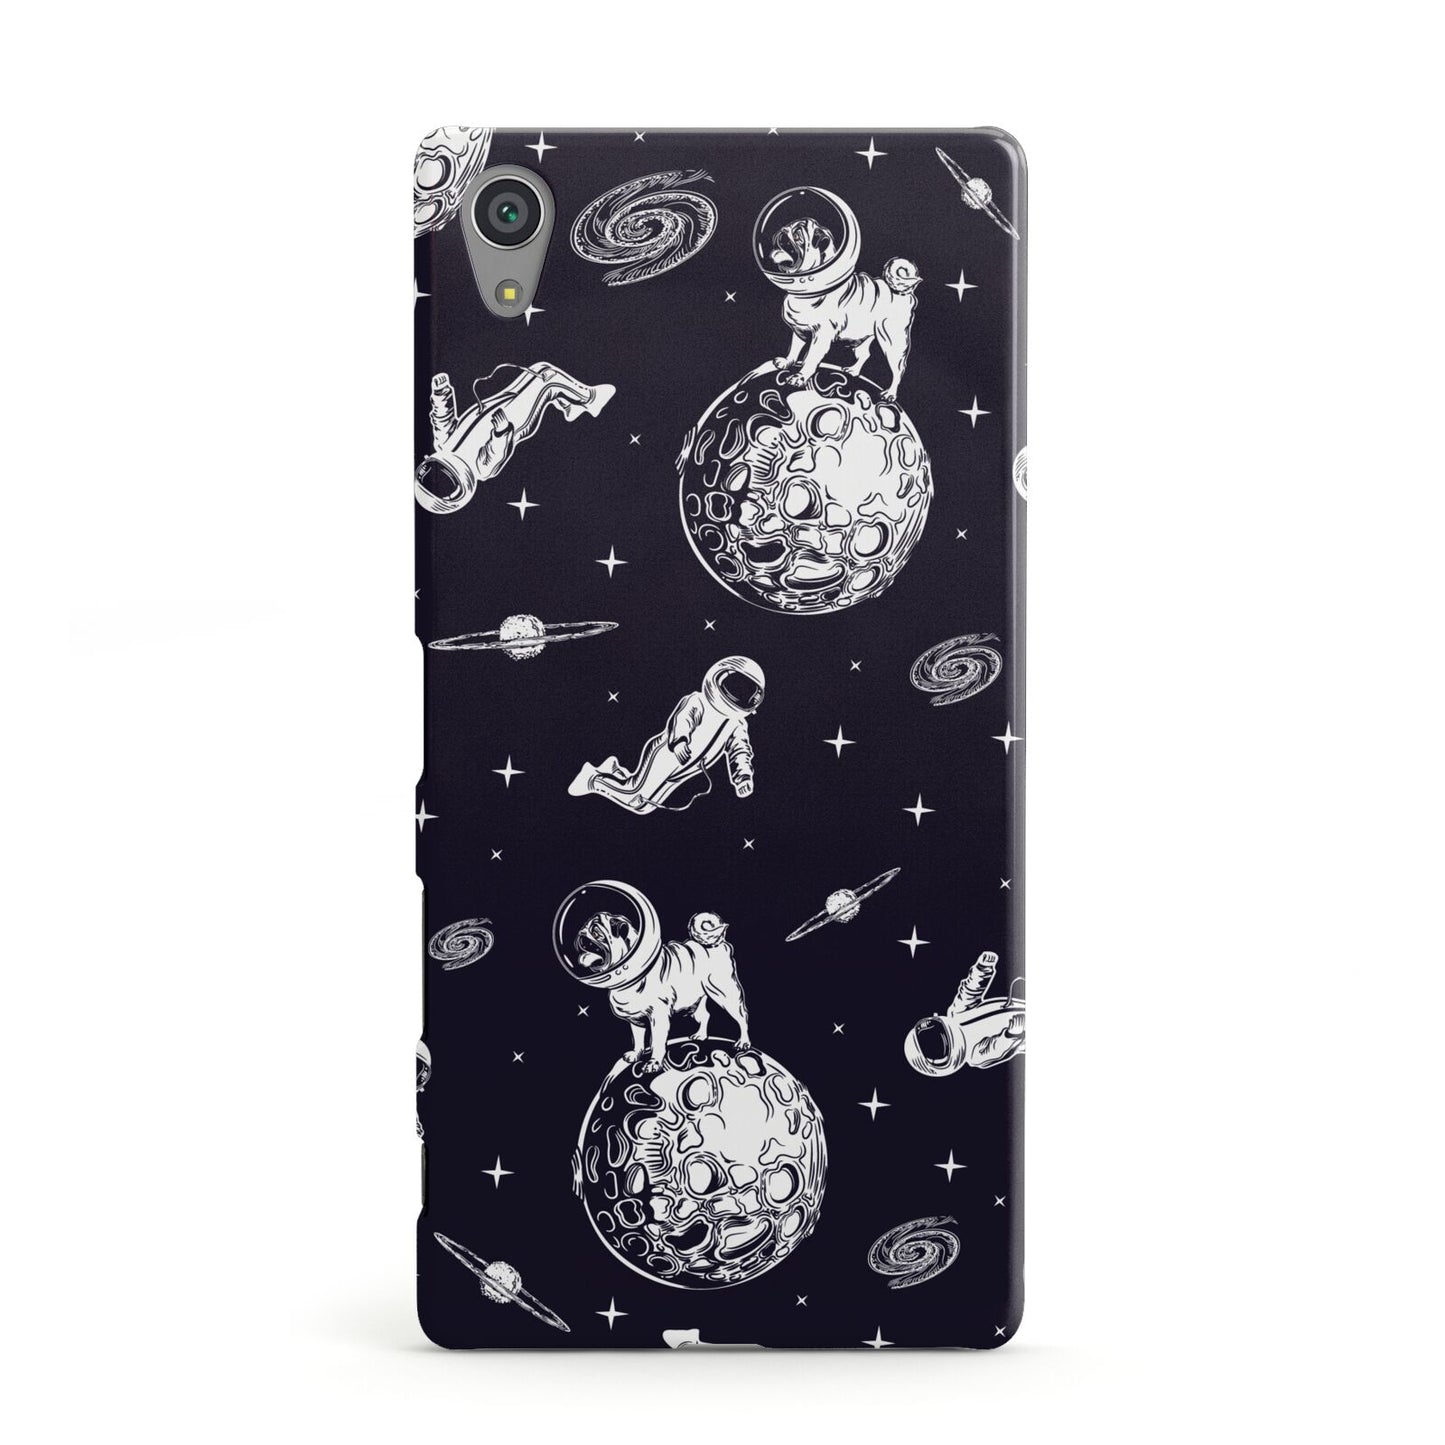 Pug in Space Sony Xperia Case